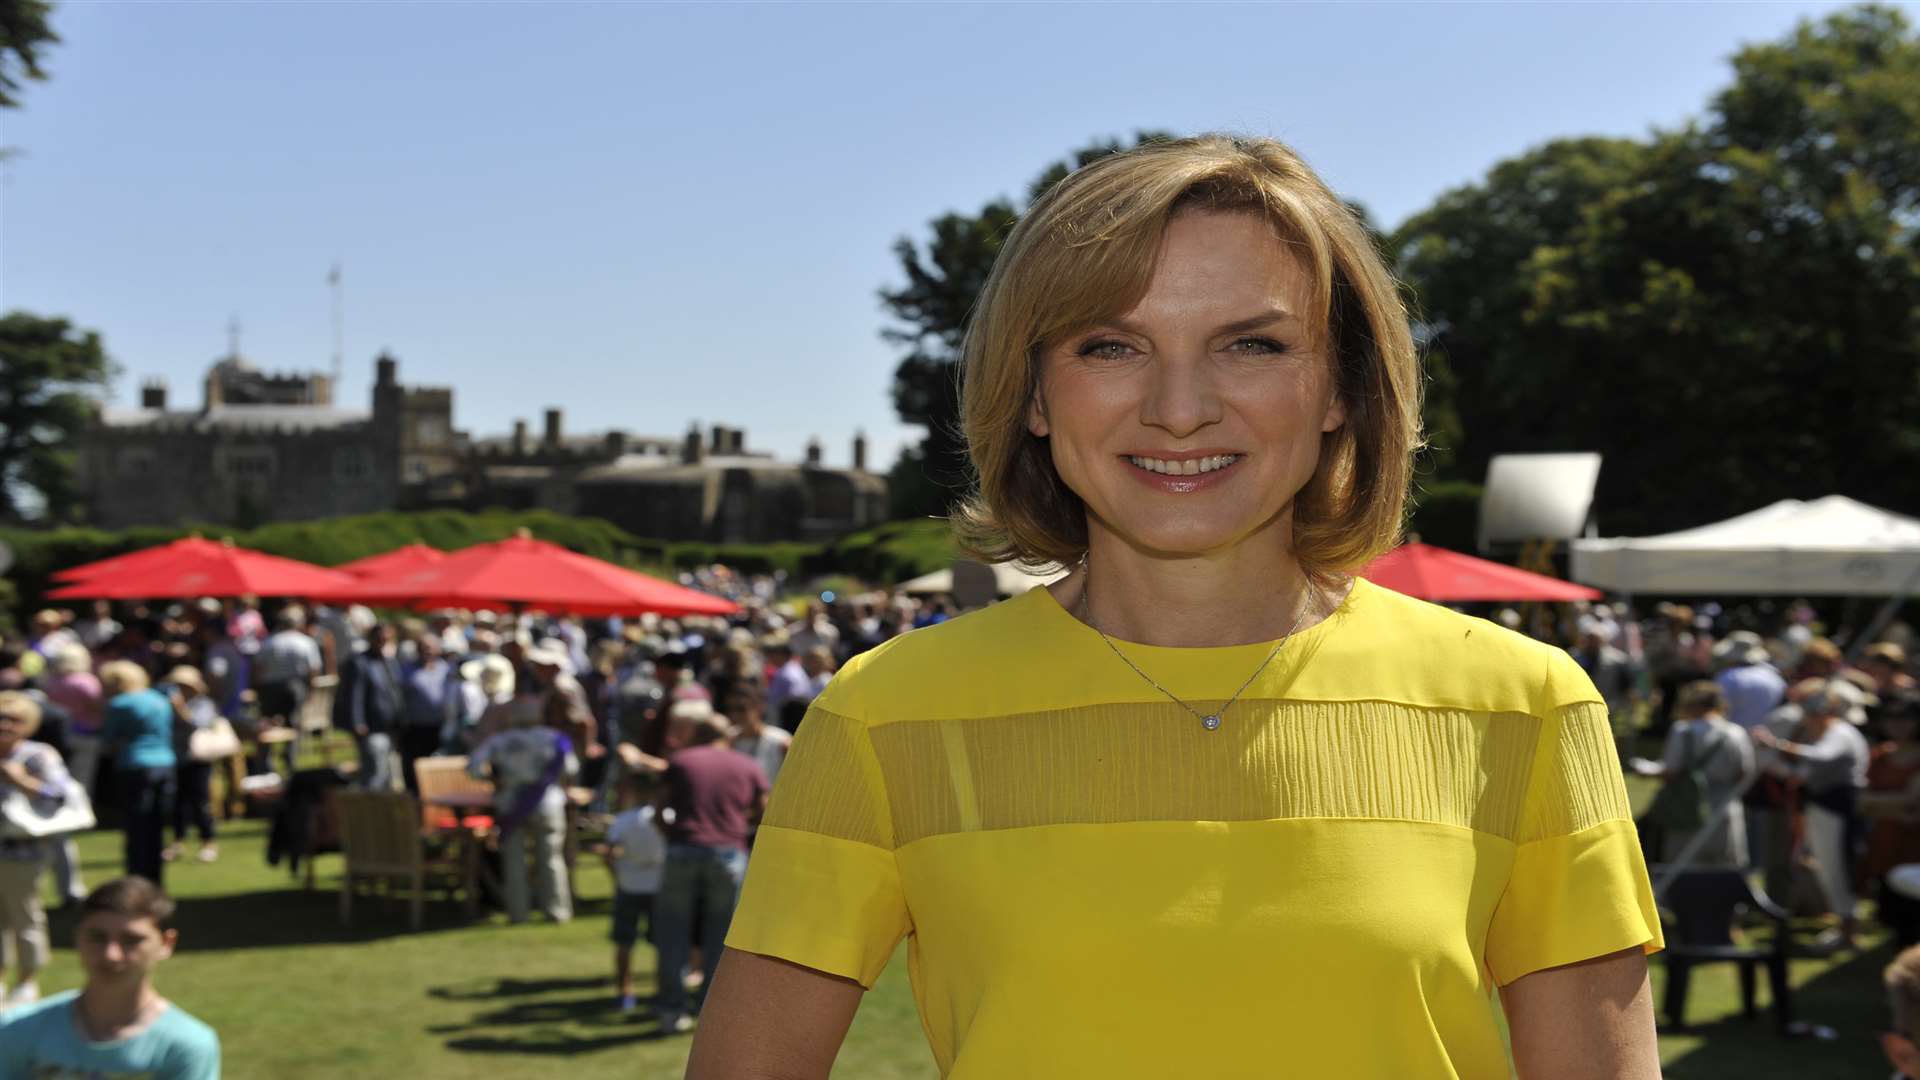 The Bbc S Antiques Roadshow With Presenter Fiona Bruce Is Coming To Ightham Mote Near Borough